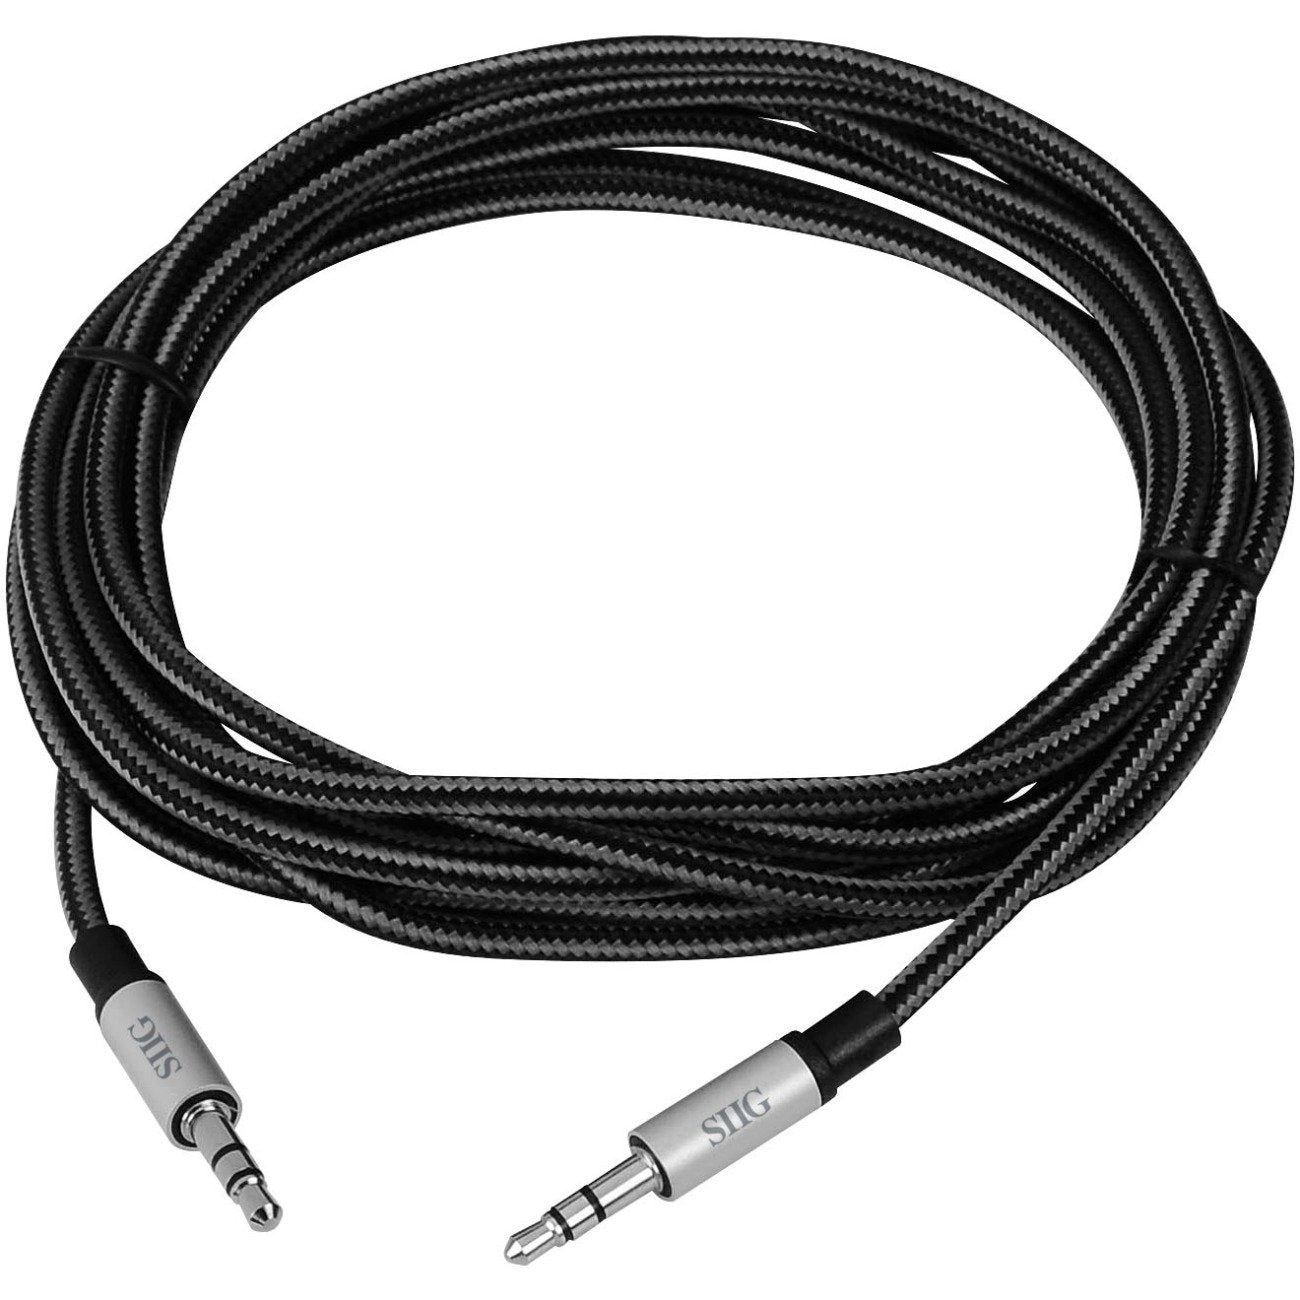 SIIG Woven Fabric Braided 3.5mm Stereo Aux Cable (M-M) - 3M